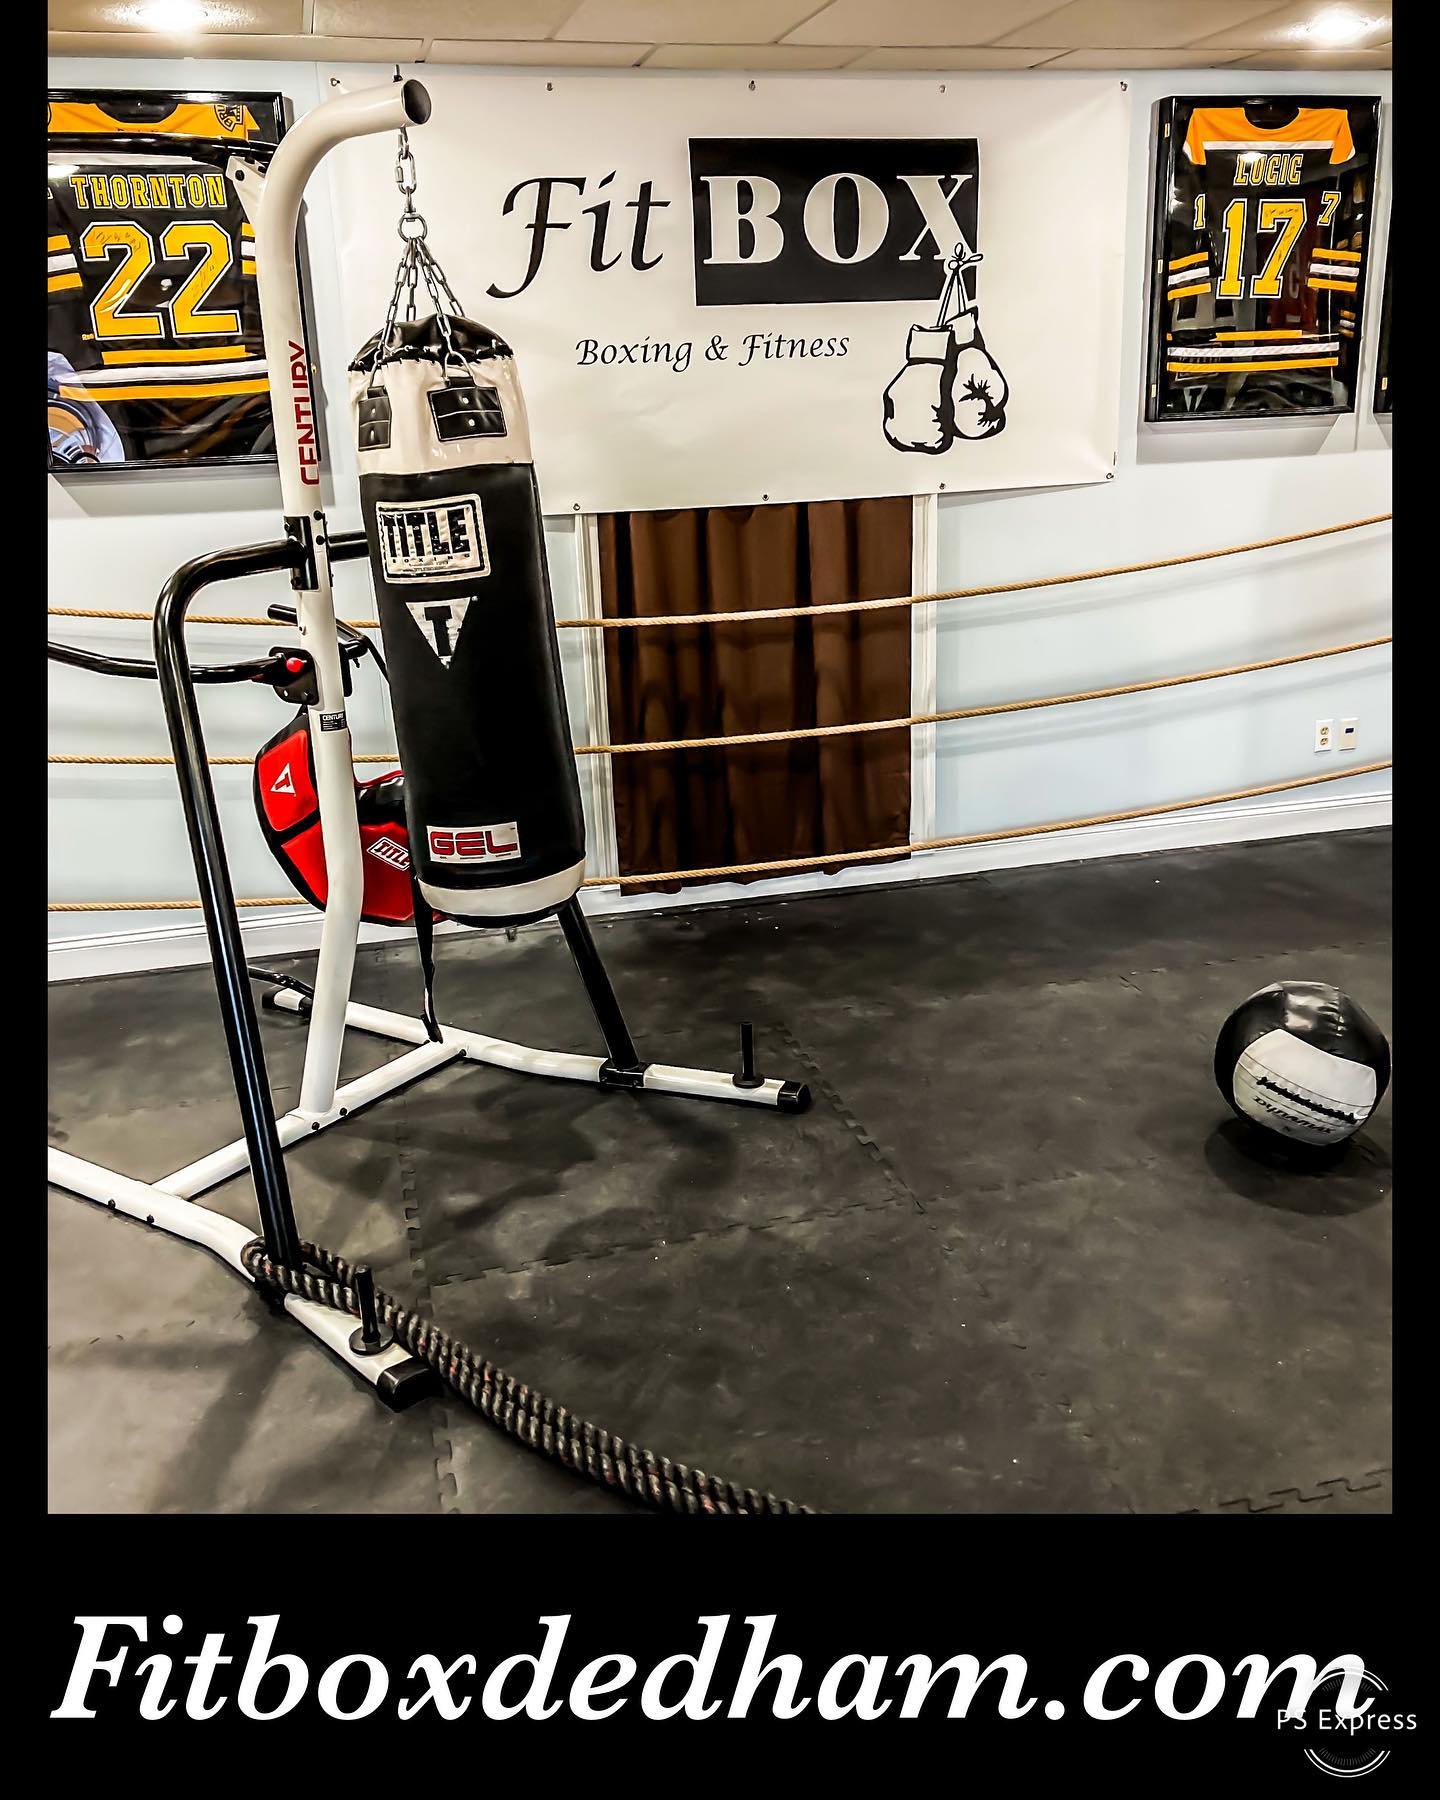 Check us out at
www.FitboxDedham.com to learn more. @tommymcinerney